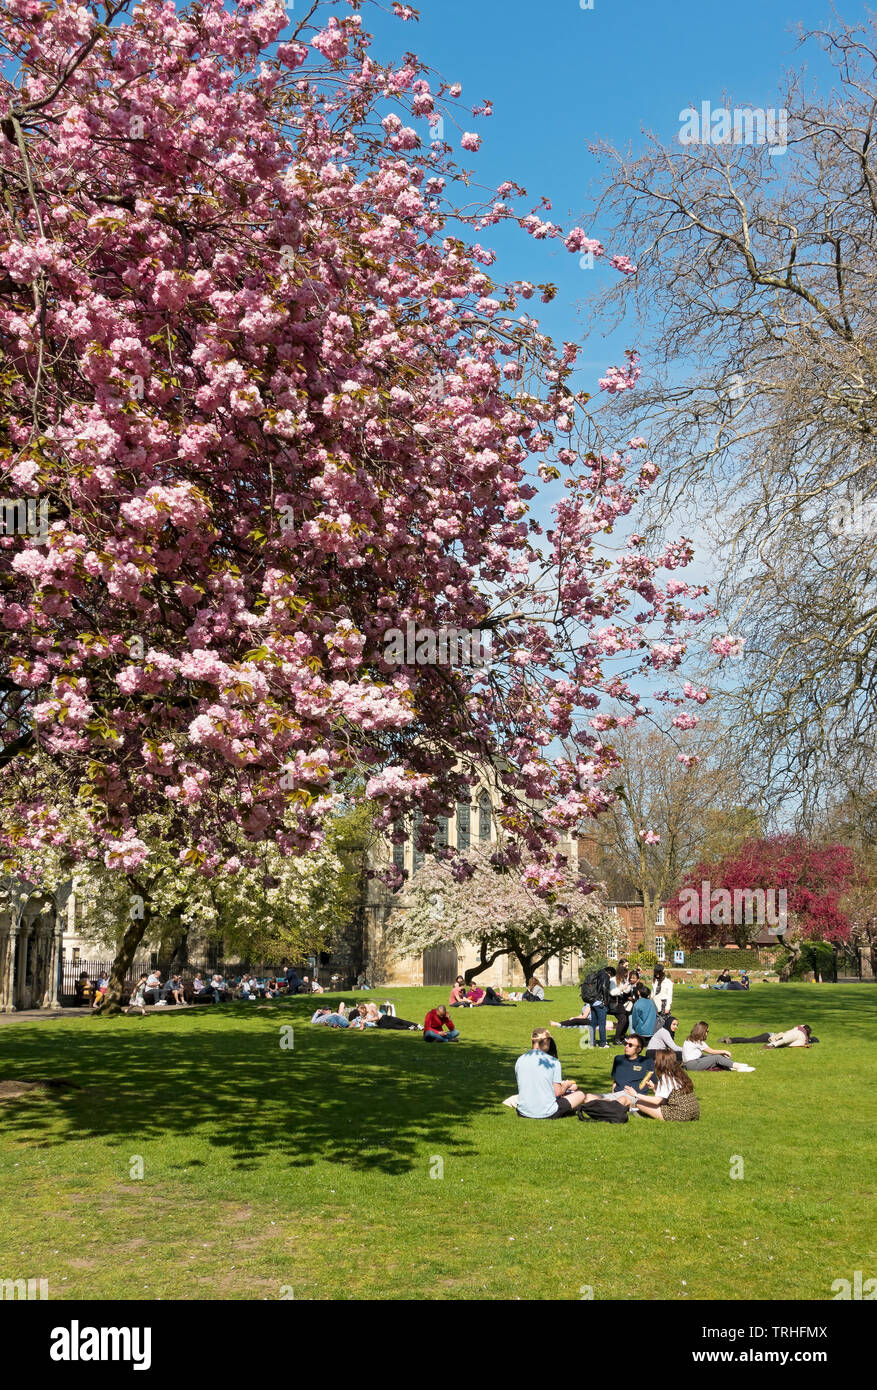 Cherry blossom tree and people sitting outside outdoors relaxing on park grass garden in spring sunshine Deans Park York North Yorkshire England UK Stock Photo